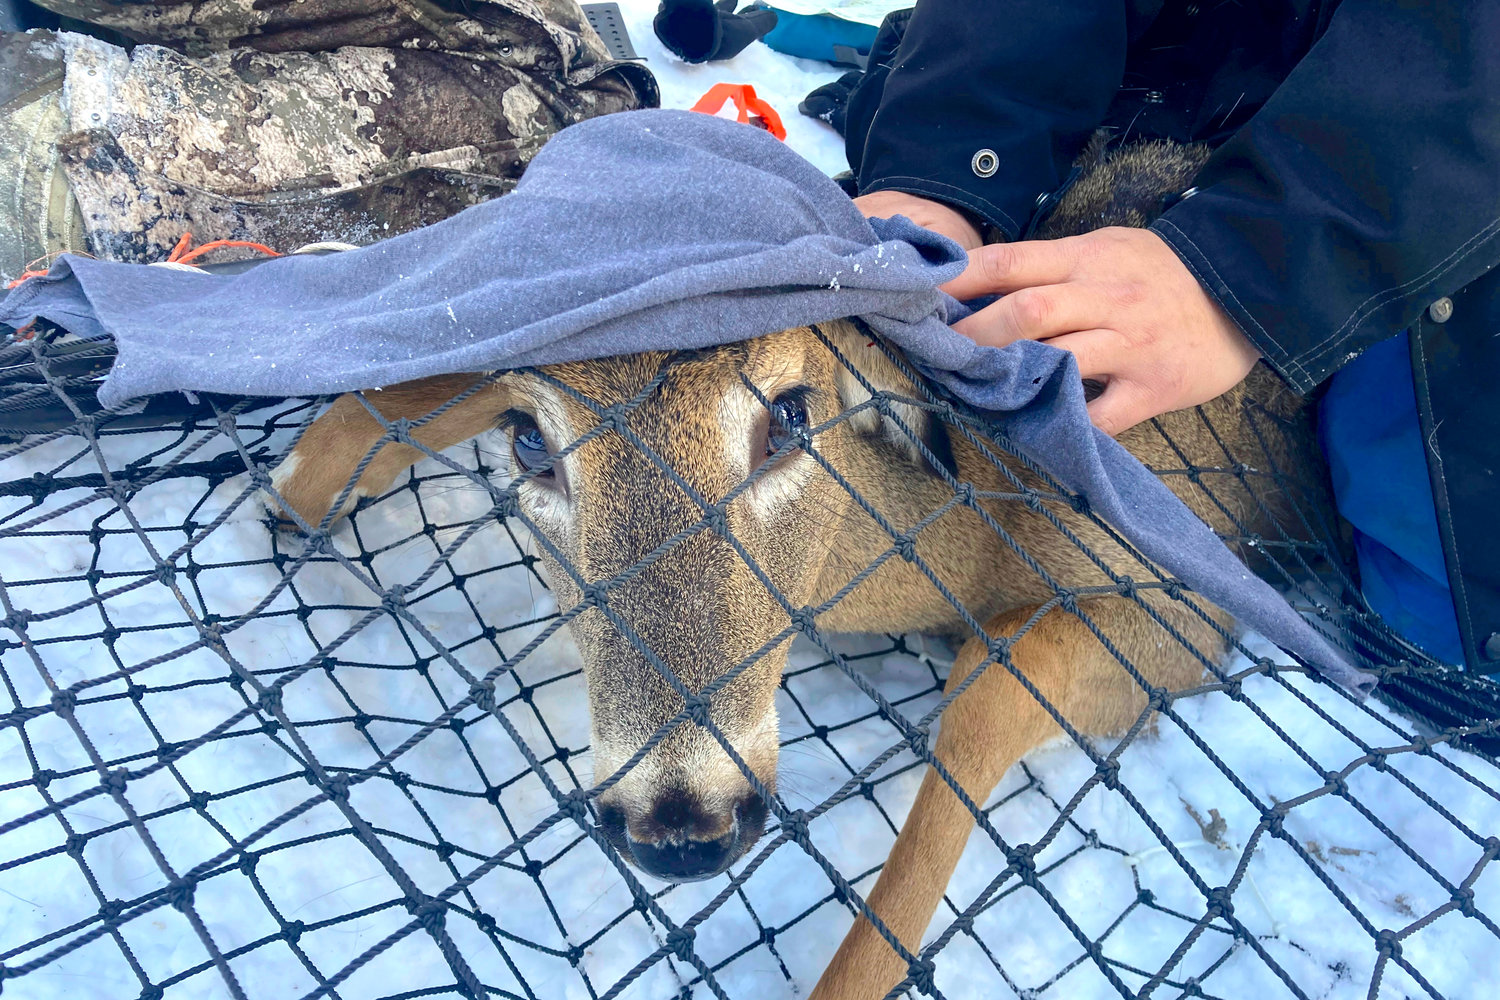 TESTING — A young buck peaks out from under a blanket while in a Clover deer trap. A wildlife team is testing the animal for the coronavirus and taking other biological samples in Grand Portage, Minn. on March 2. Recently, an early Canadian study showed someone in nearby Ontario likely contracted a highly mutated strain from a deer.